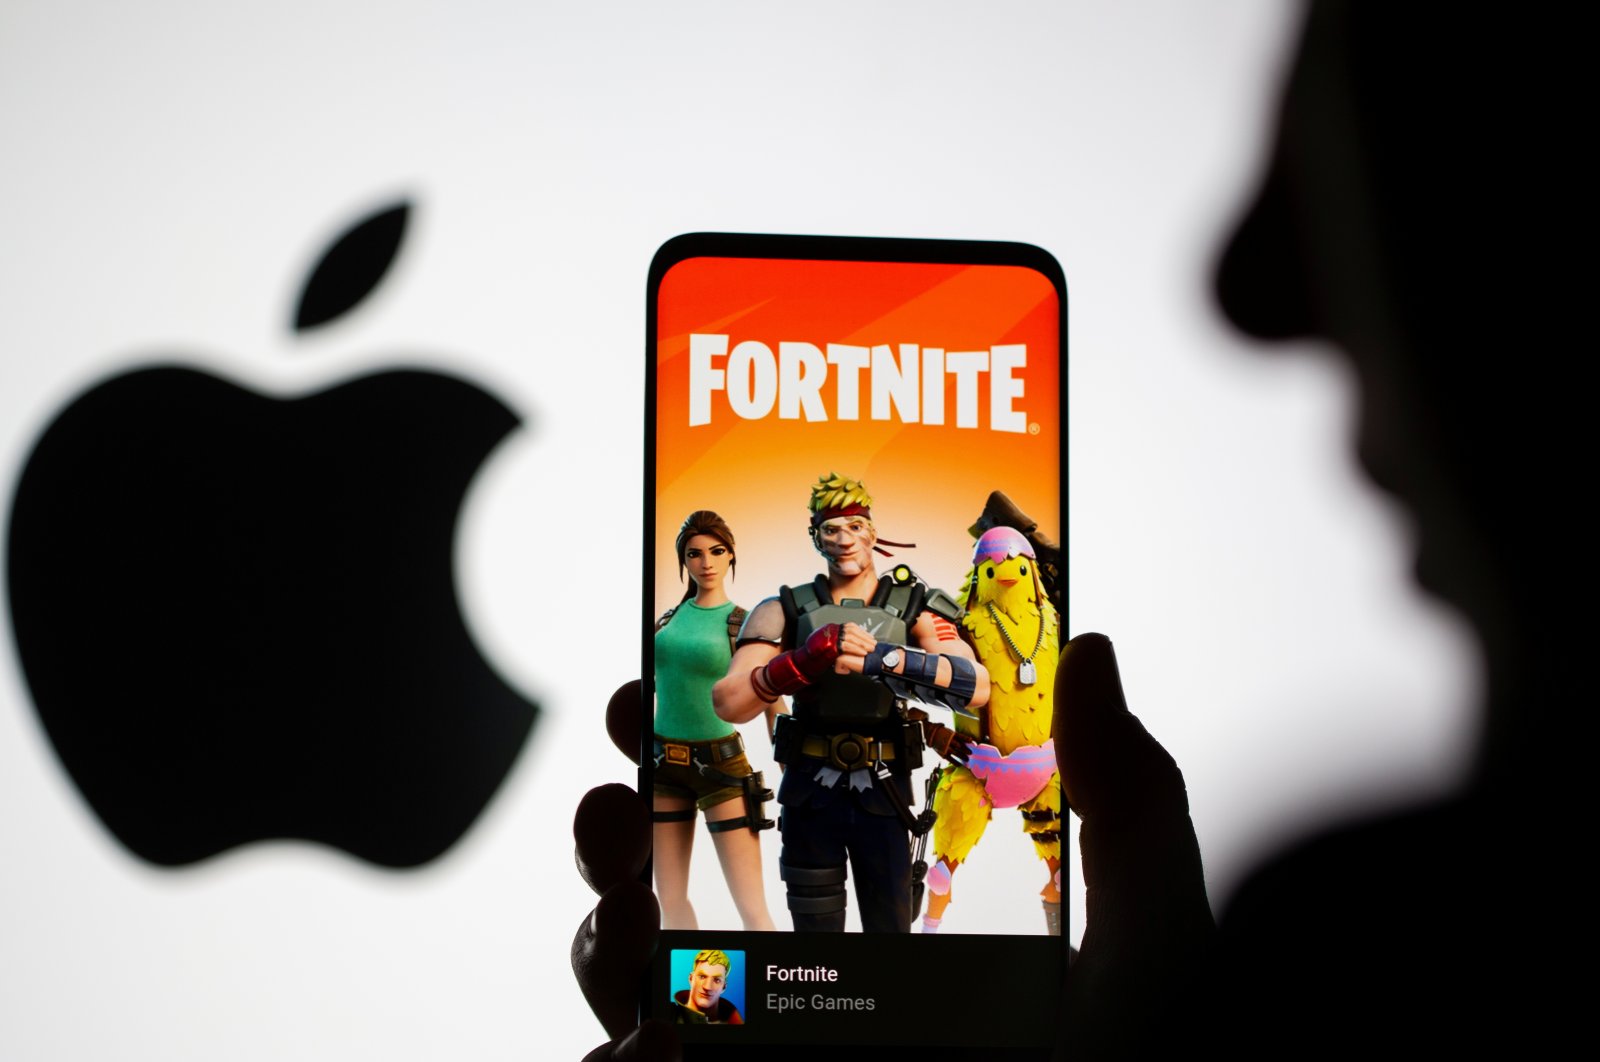 Fortnite game graphic is displayed on a smartphone in front of Apple logo in this illustration taken May 2, 2021. (Reuters Photo)